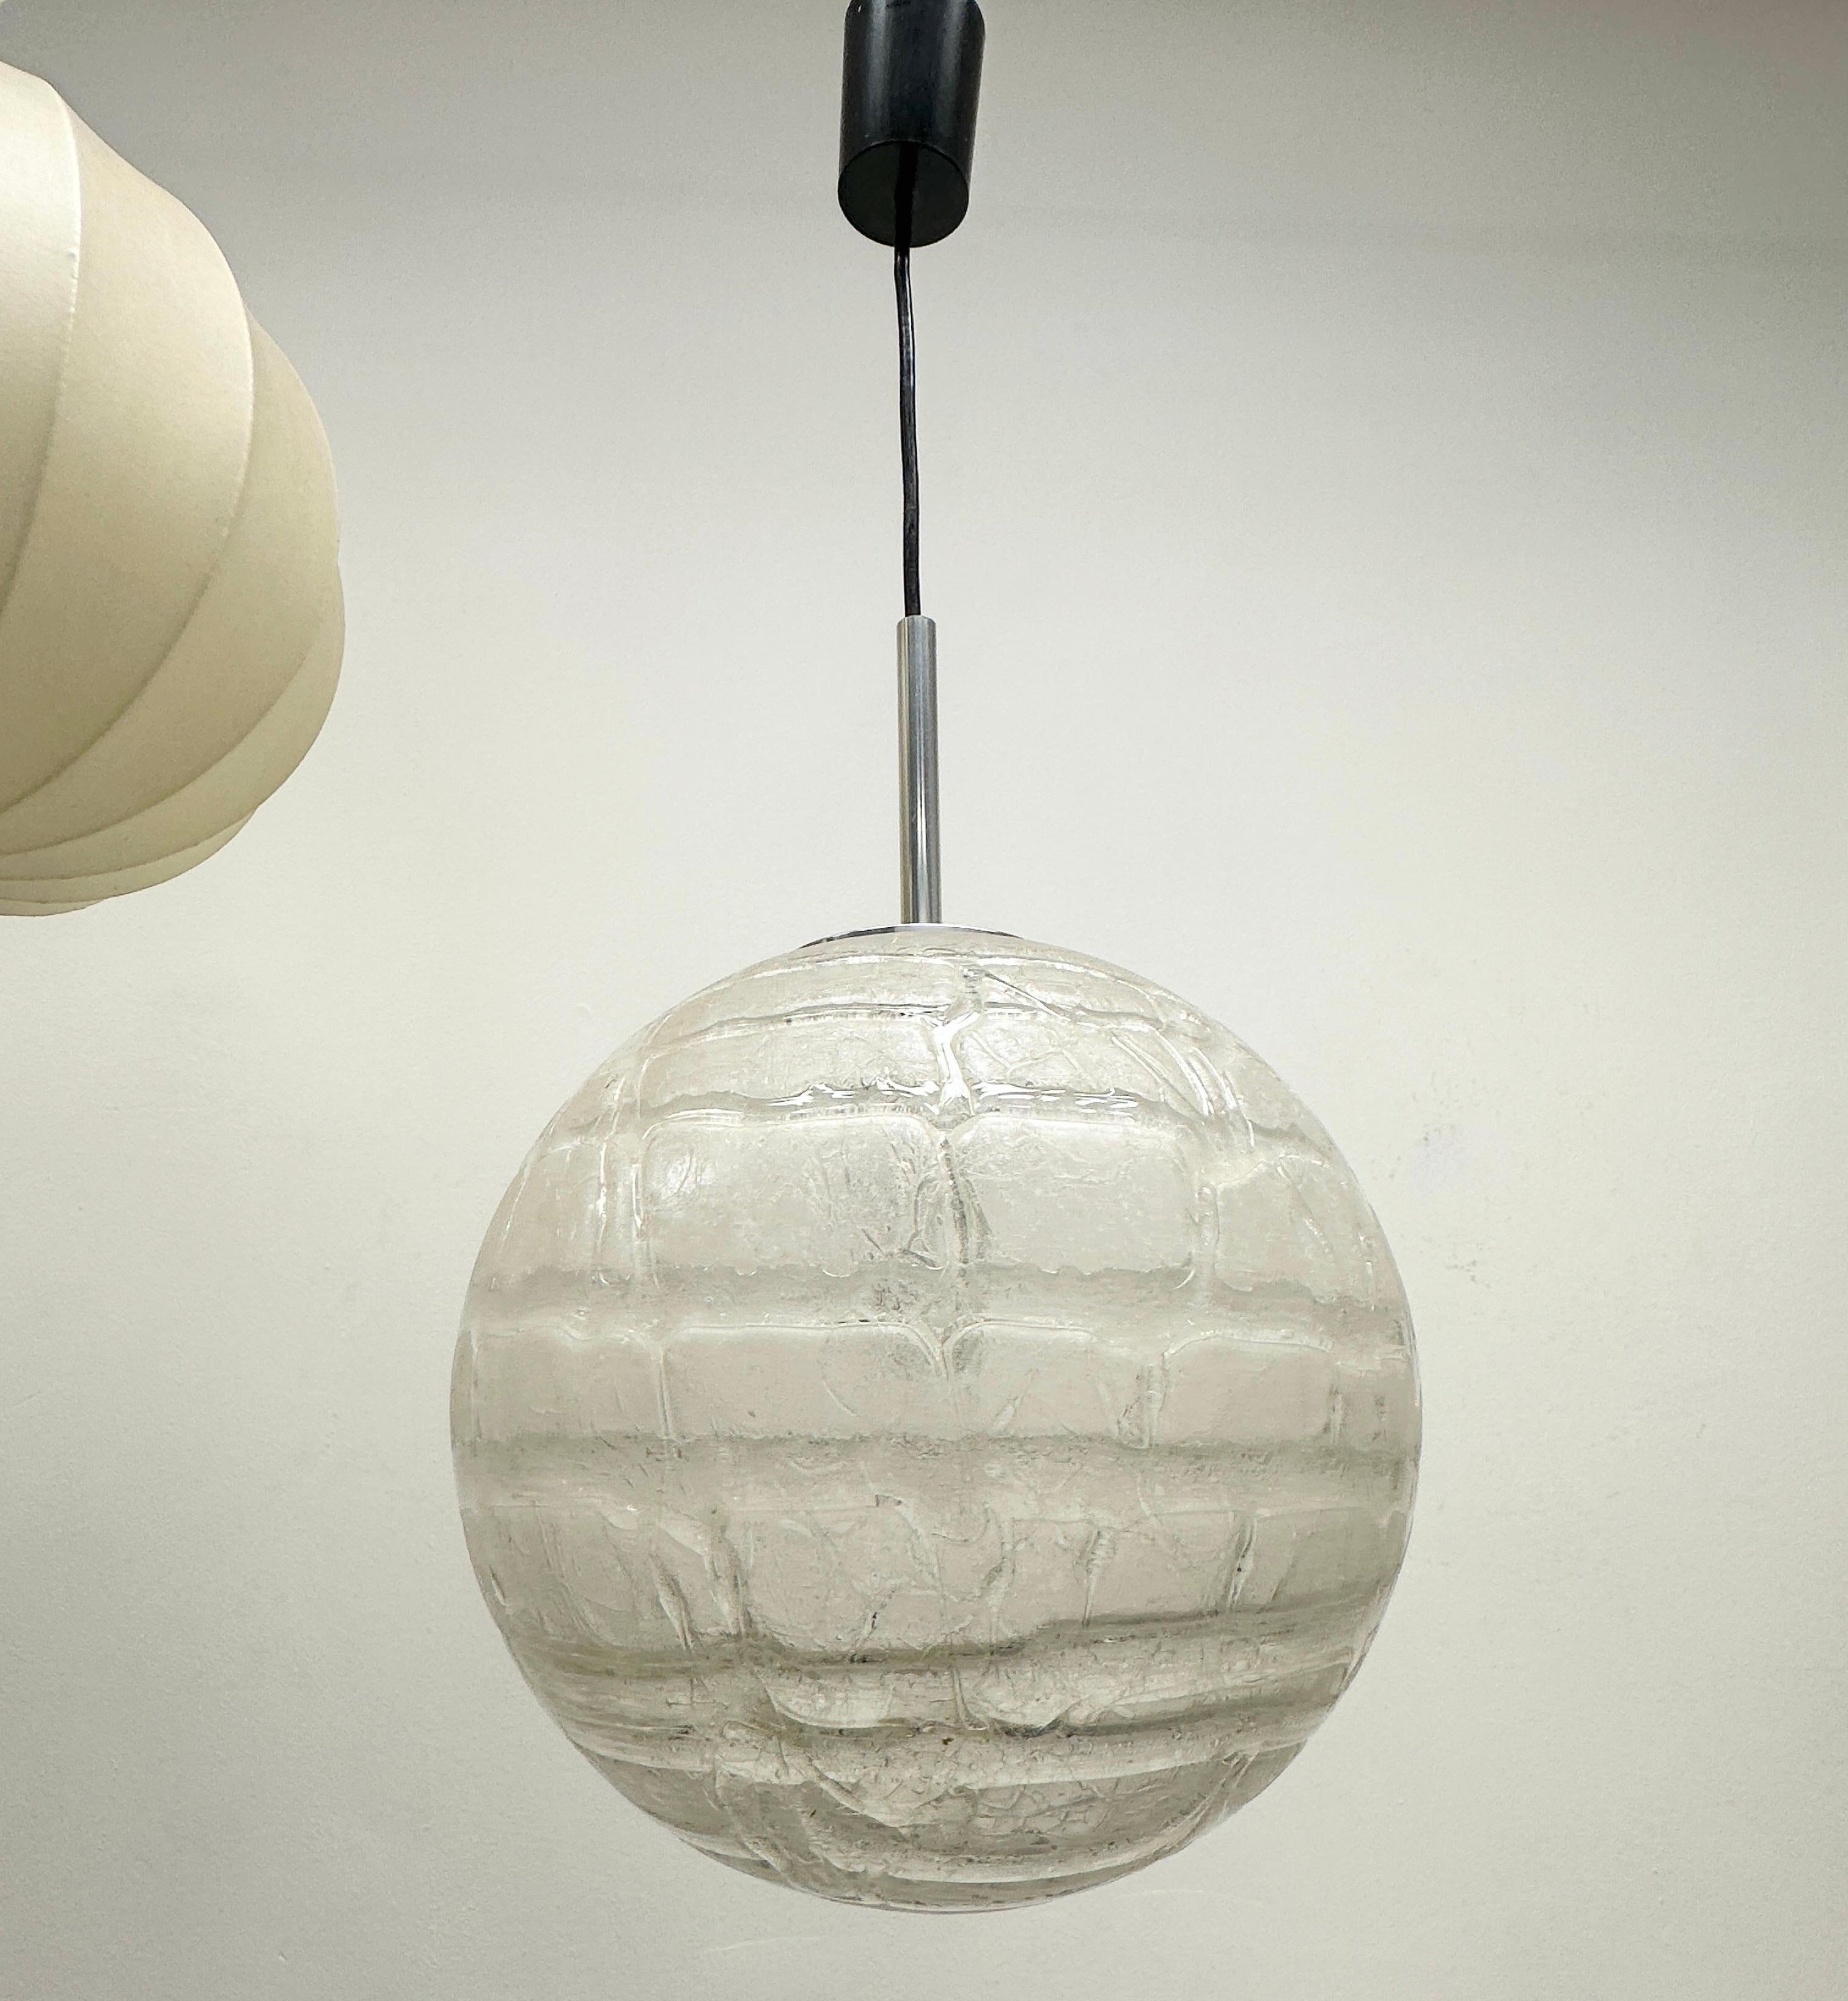 Large vintage snow ball pattern midcentury murano glass ceiling pendant light fixture by Doria Leuchten, Germany. Made in the later half of the 1960s, this gorgeous pendent features wonderfully made, mouth blown murano glass which looks like a